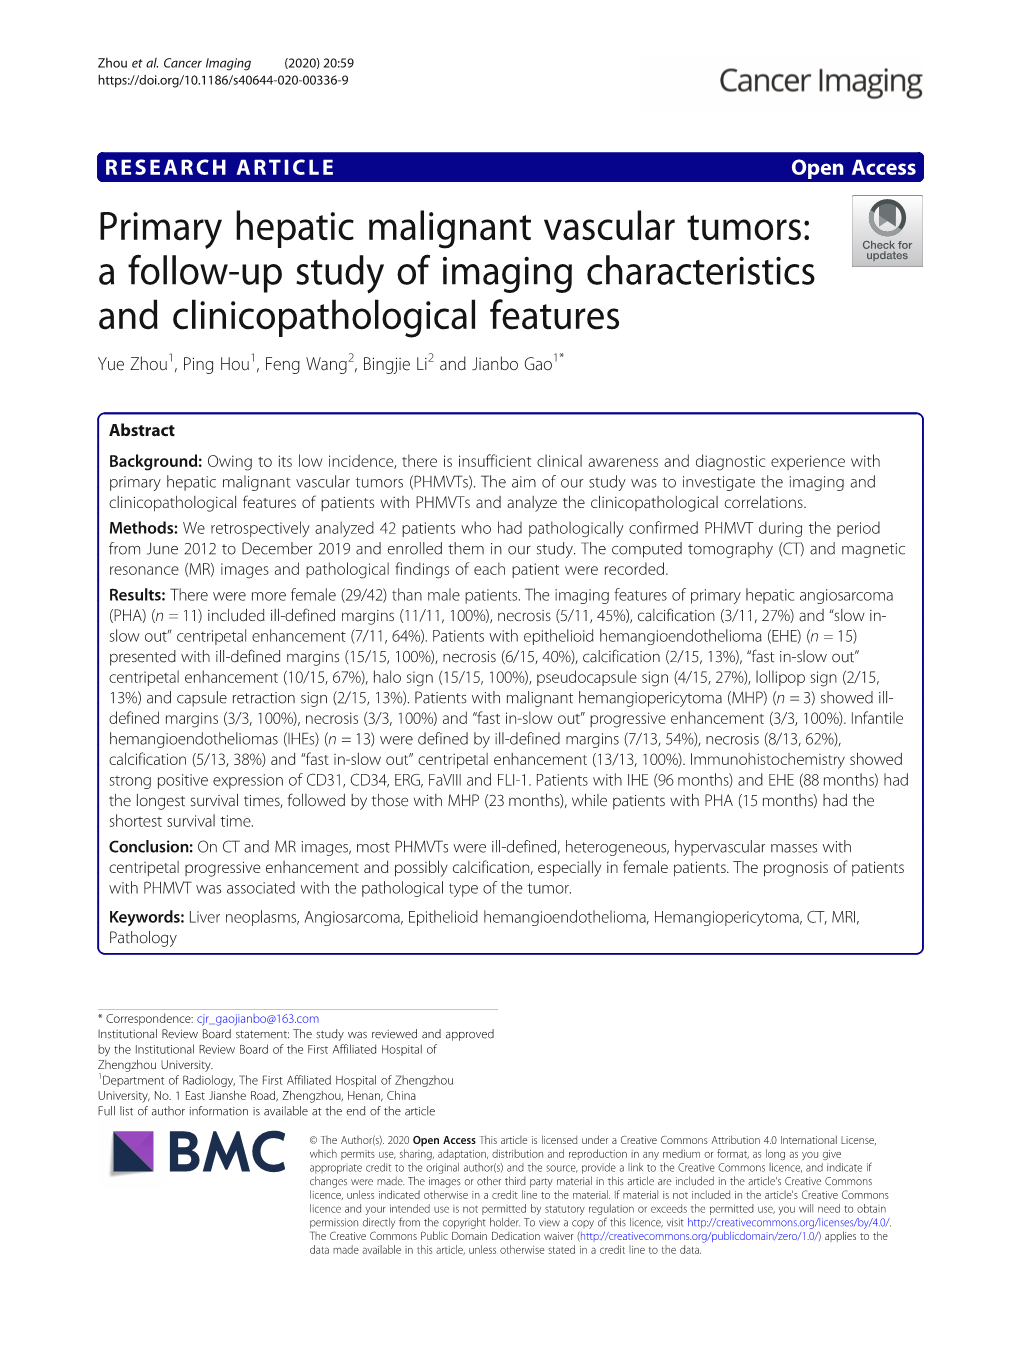 Primary Hepatic Malignant Vascular Tumors: a Follow-Up Study of Imaging